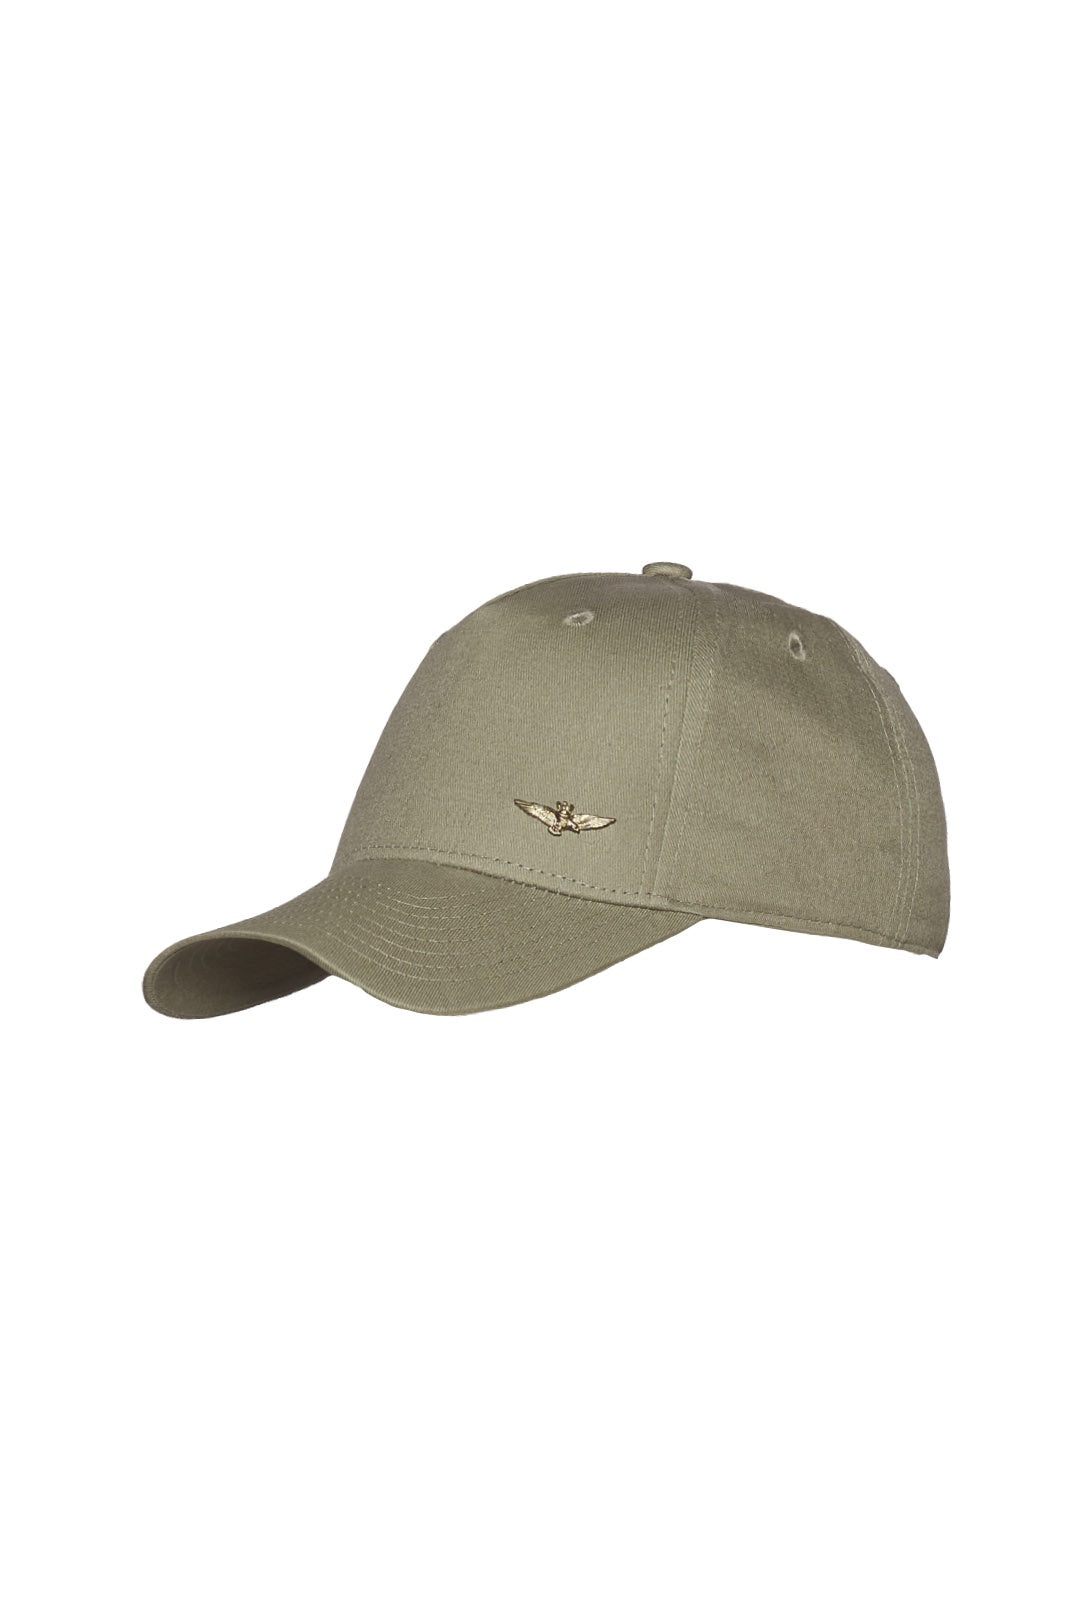 Basic cap with metal eagle